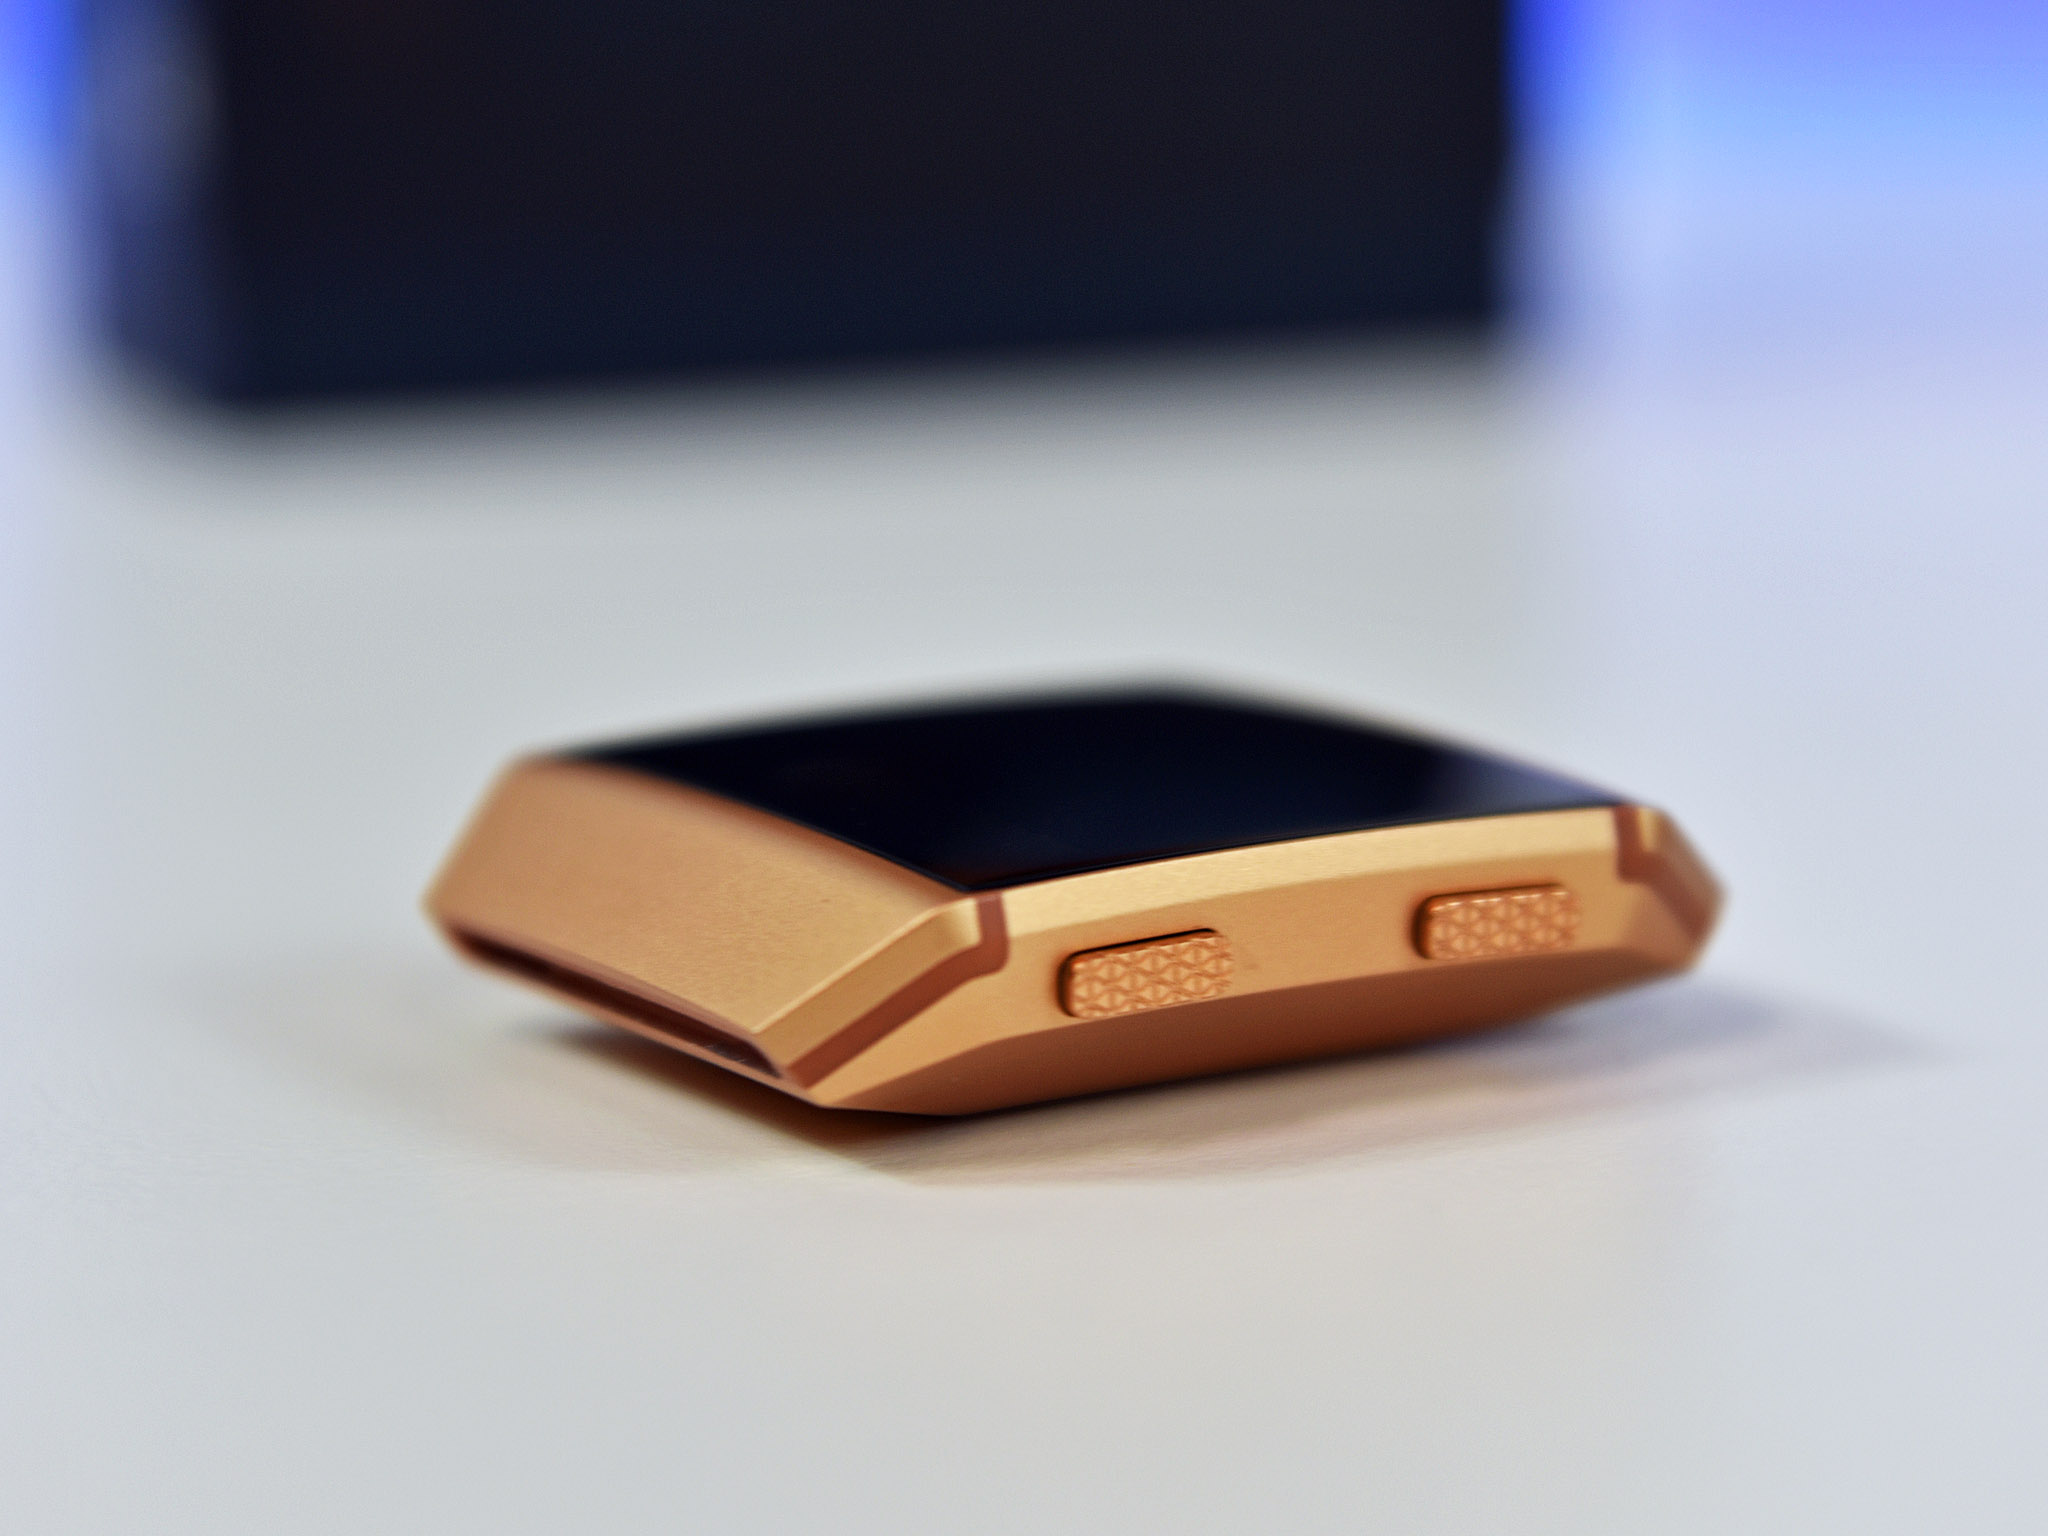 ionic band fitbit